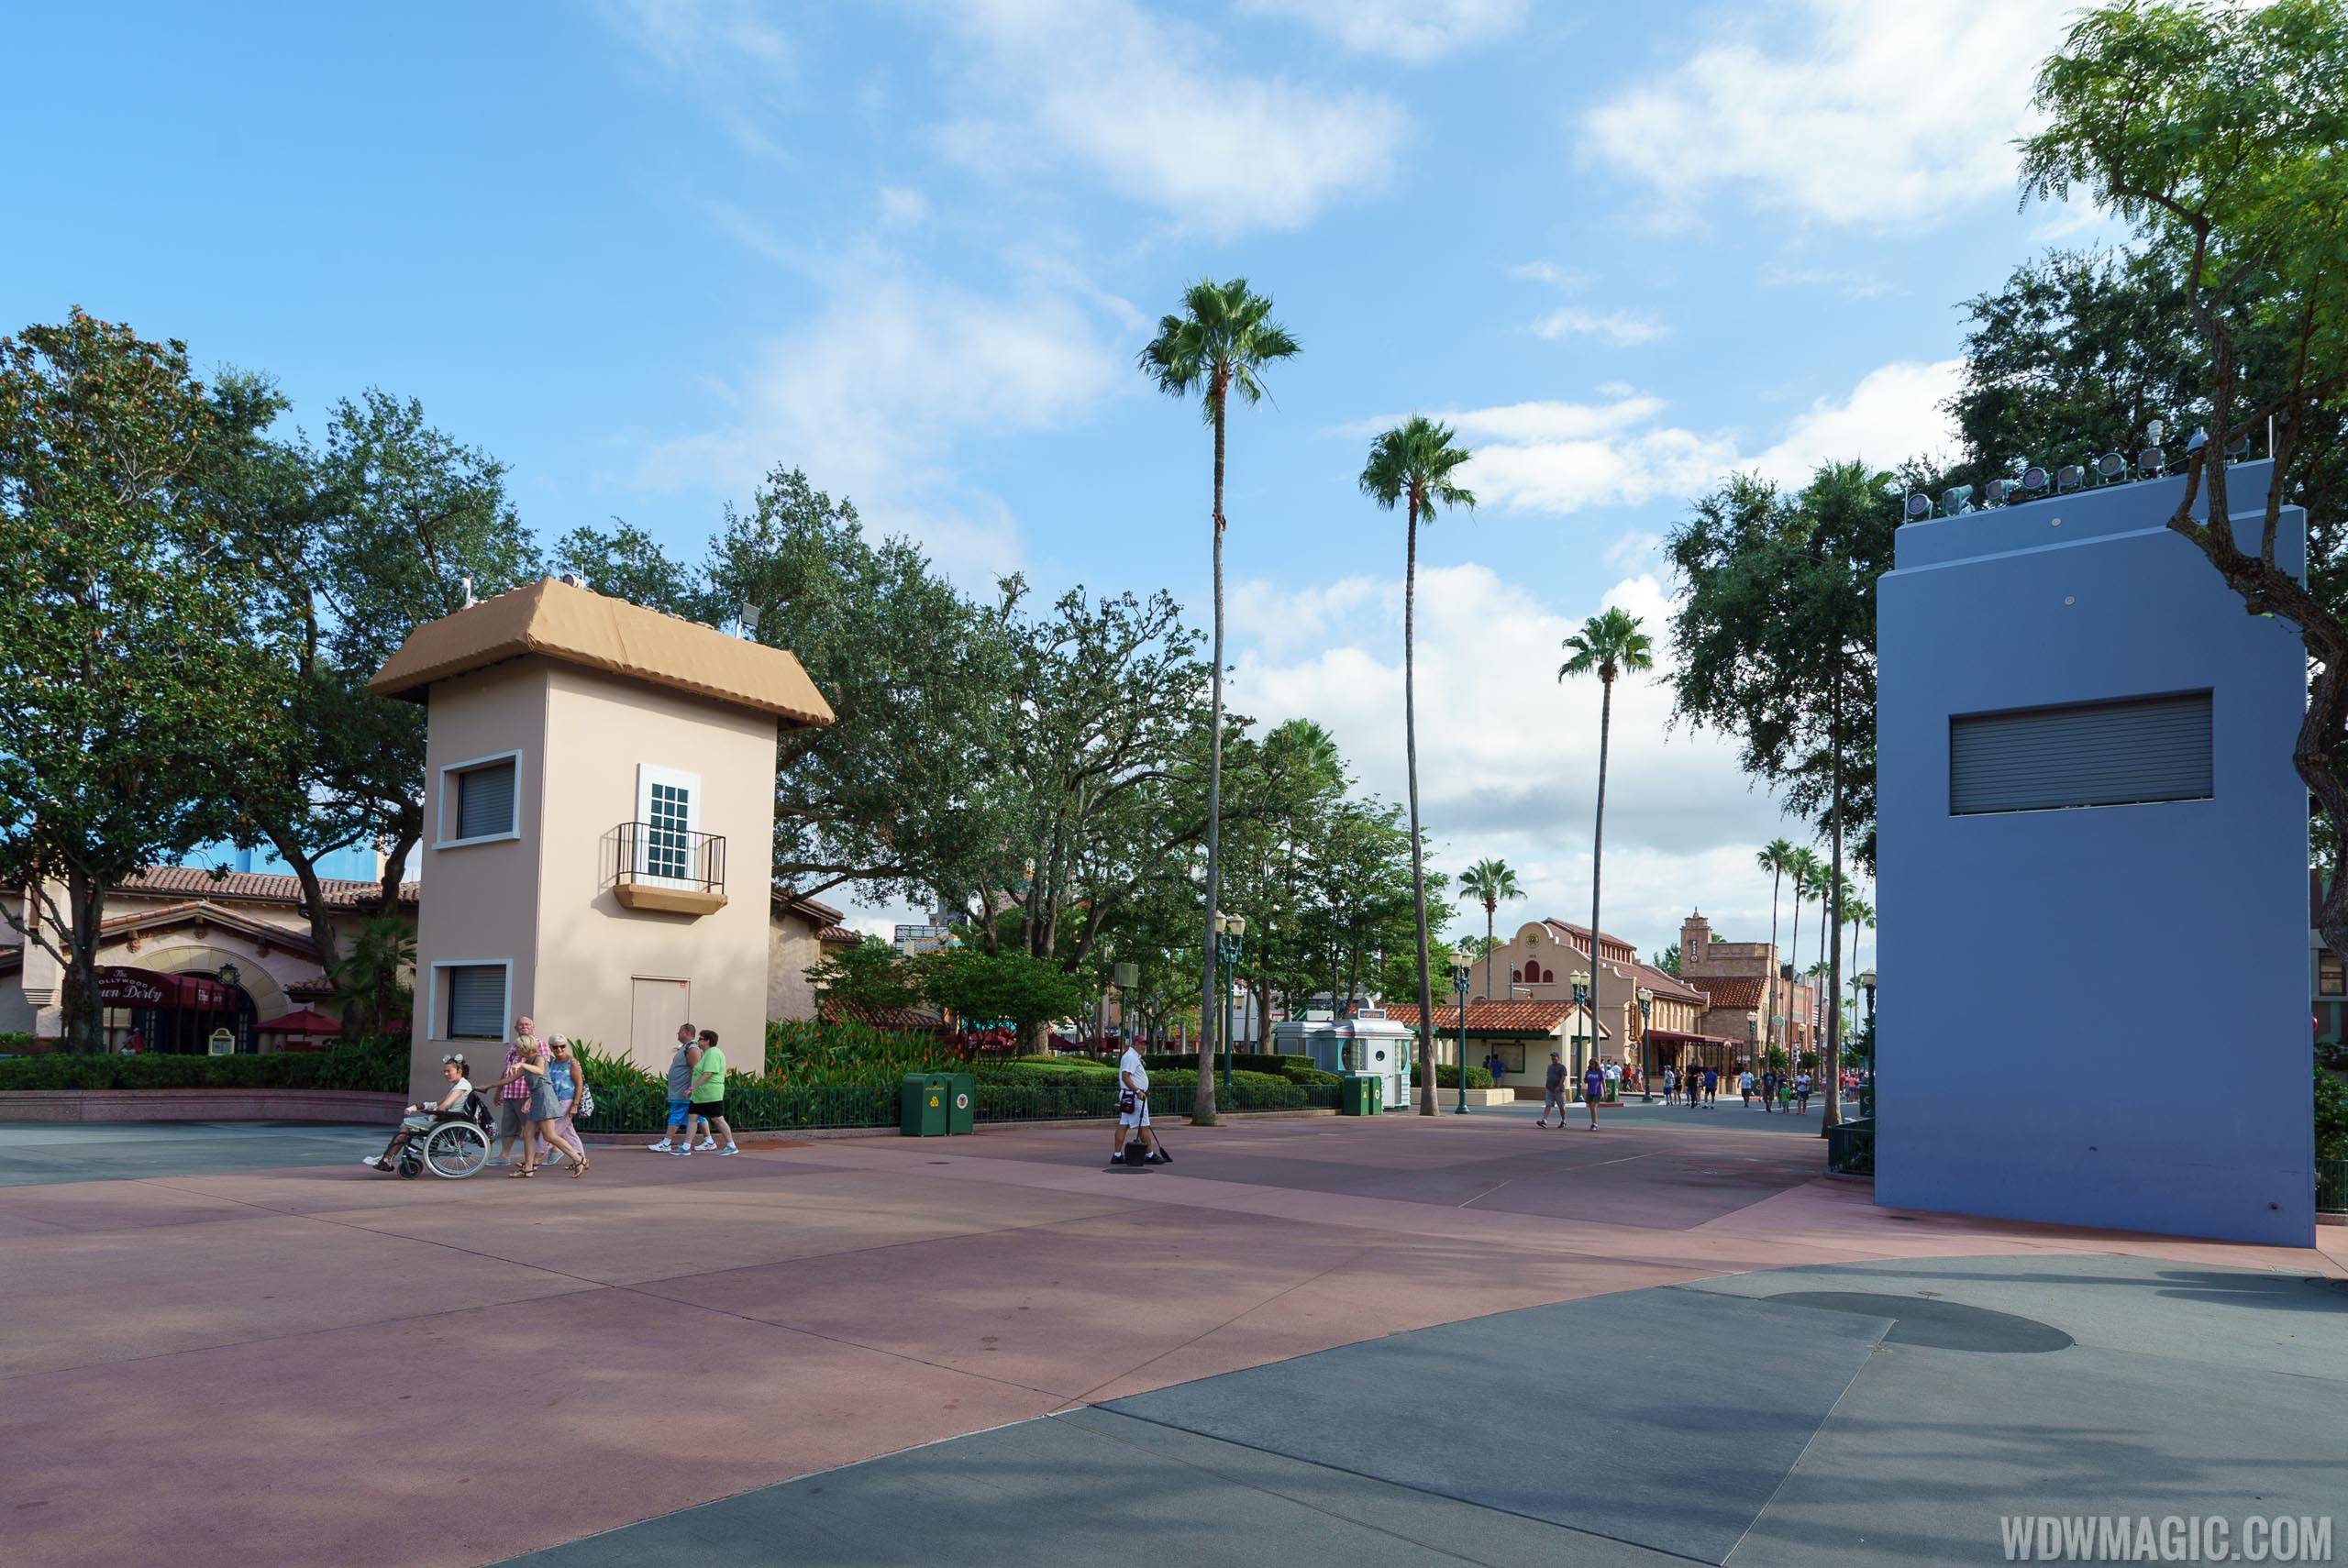 PHOTOS - Updated look at the projection tower improvements at Disney's Hollywood Studios